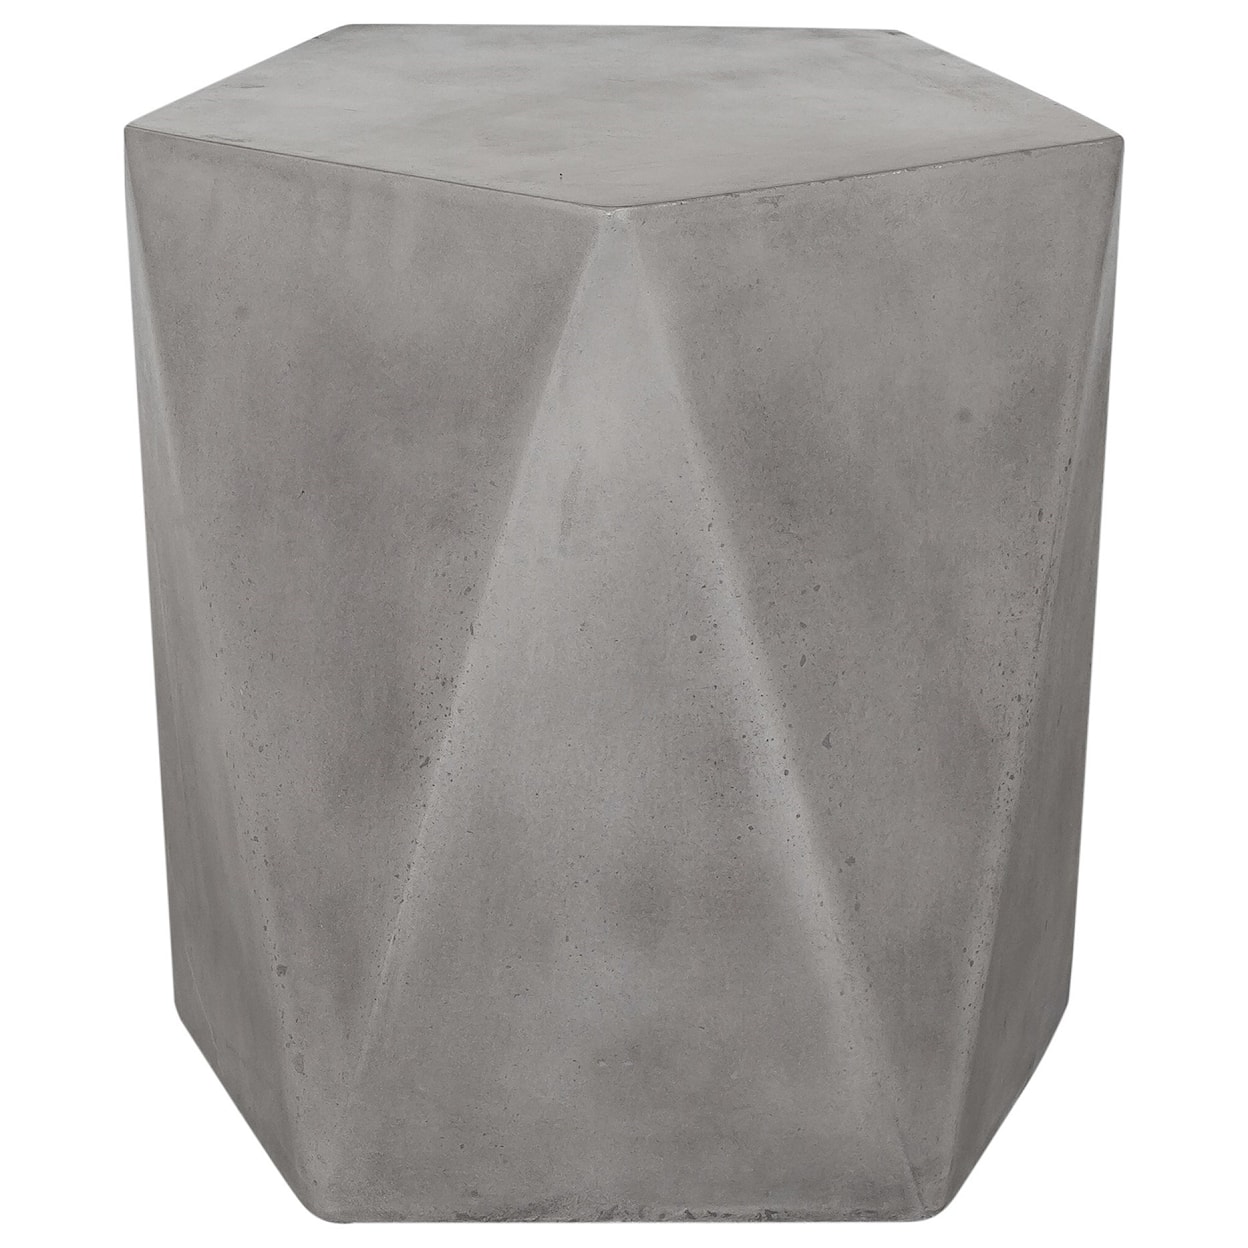 Moe's Home Collection Gem Outdoor Stool